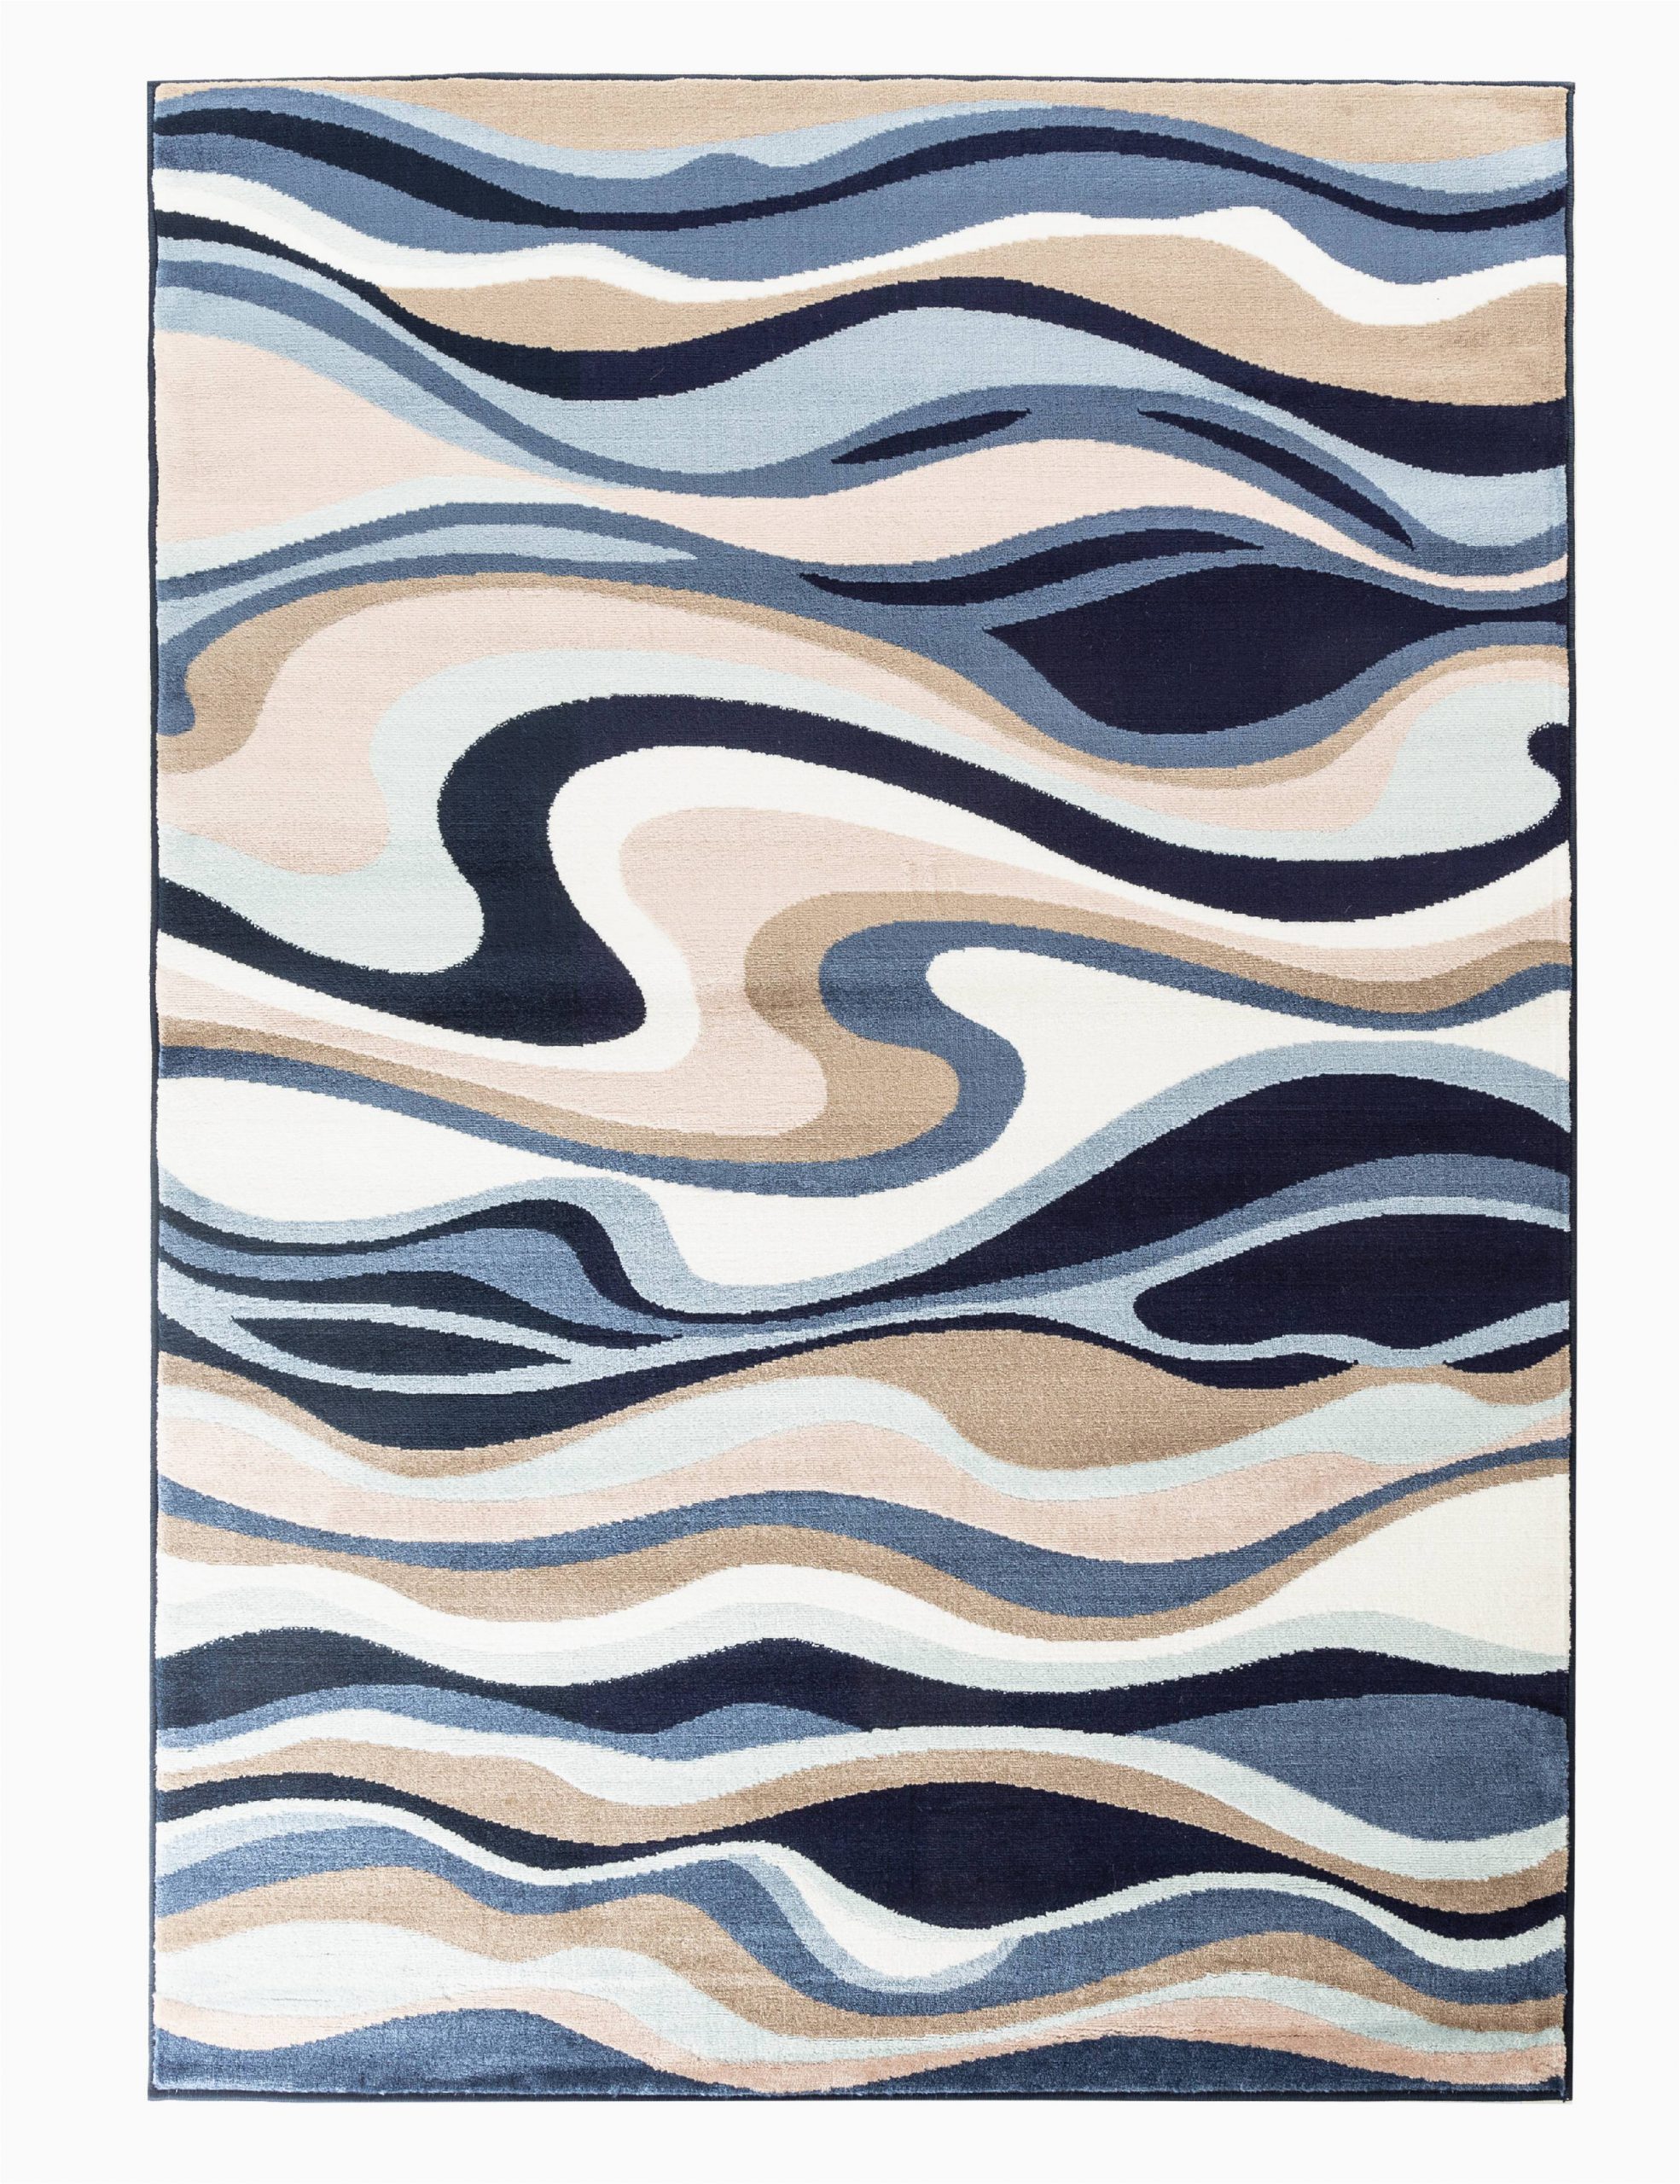 Area Rugs with Blue and Browns Romance Collection Rugs Blue White Brown Absreact Wave Design Premium soft area Rug 2 X3 Door Scatter Mat